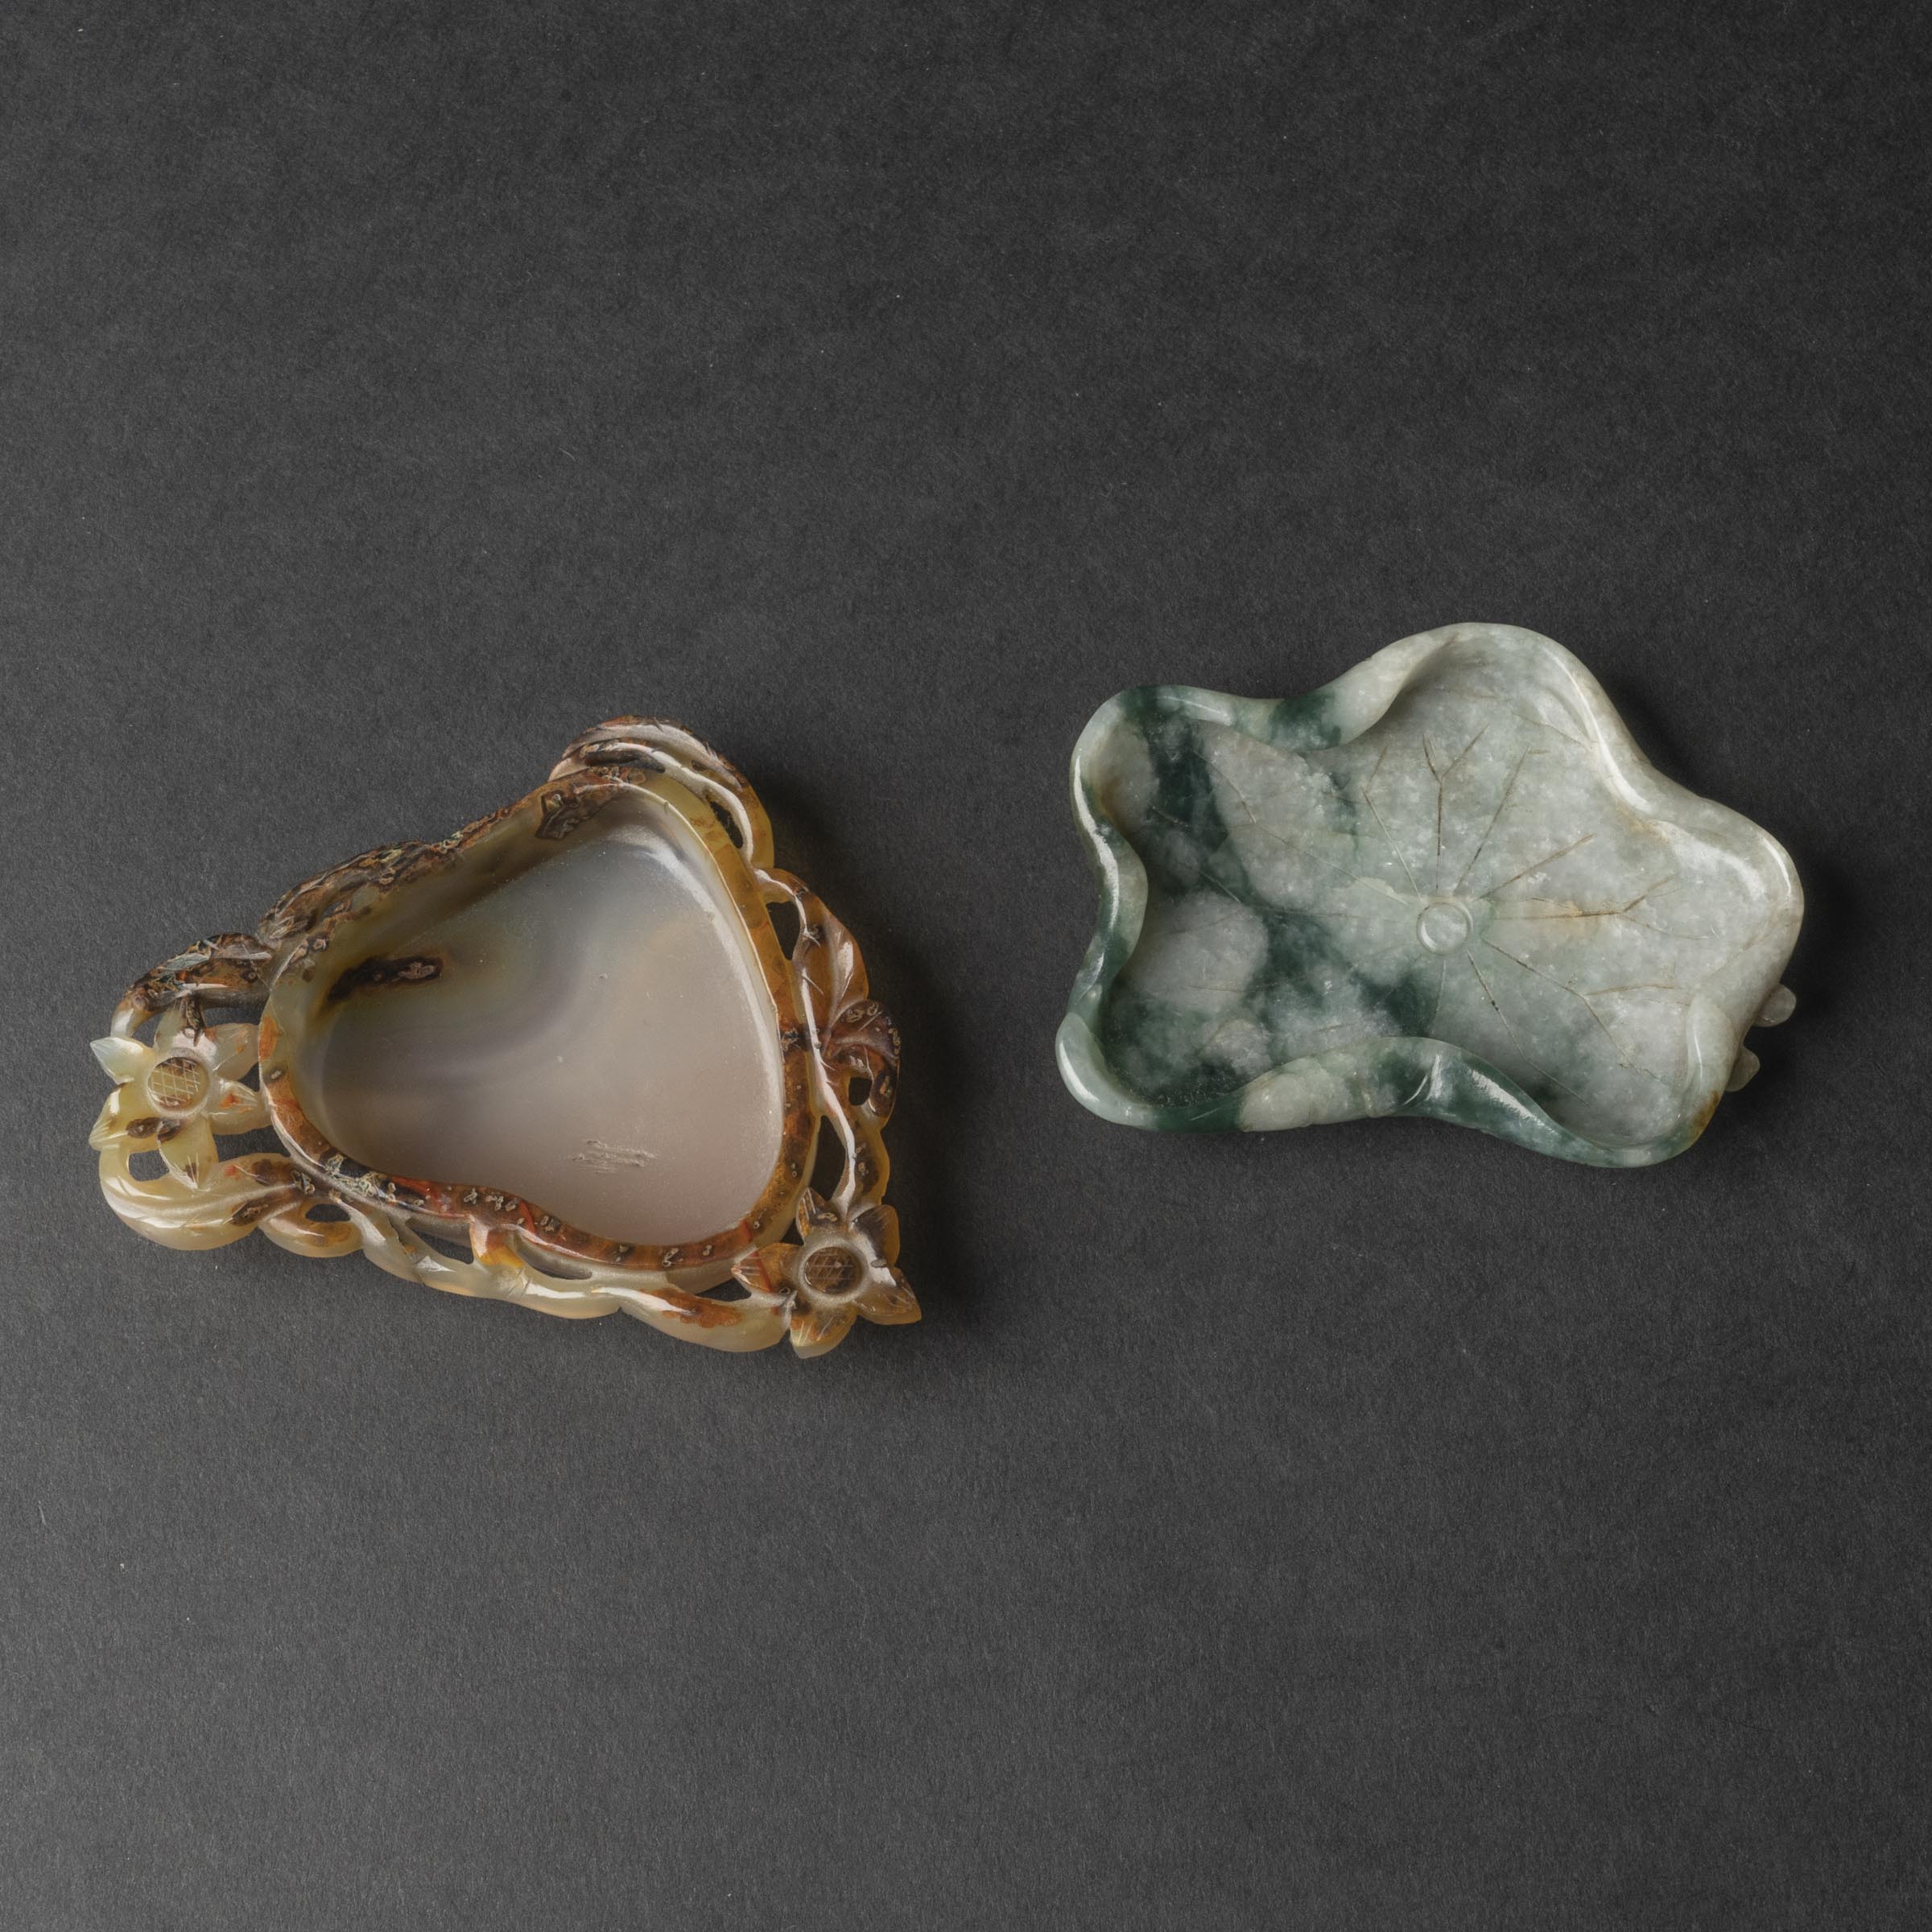 Two Jadeite and Agate Lotus-Form Washers, 19th Century